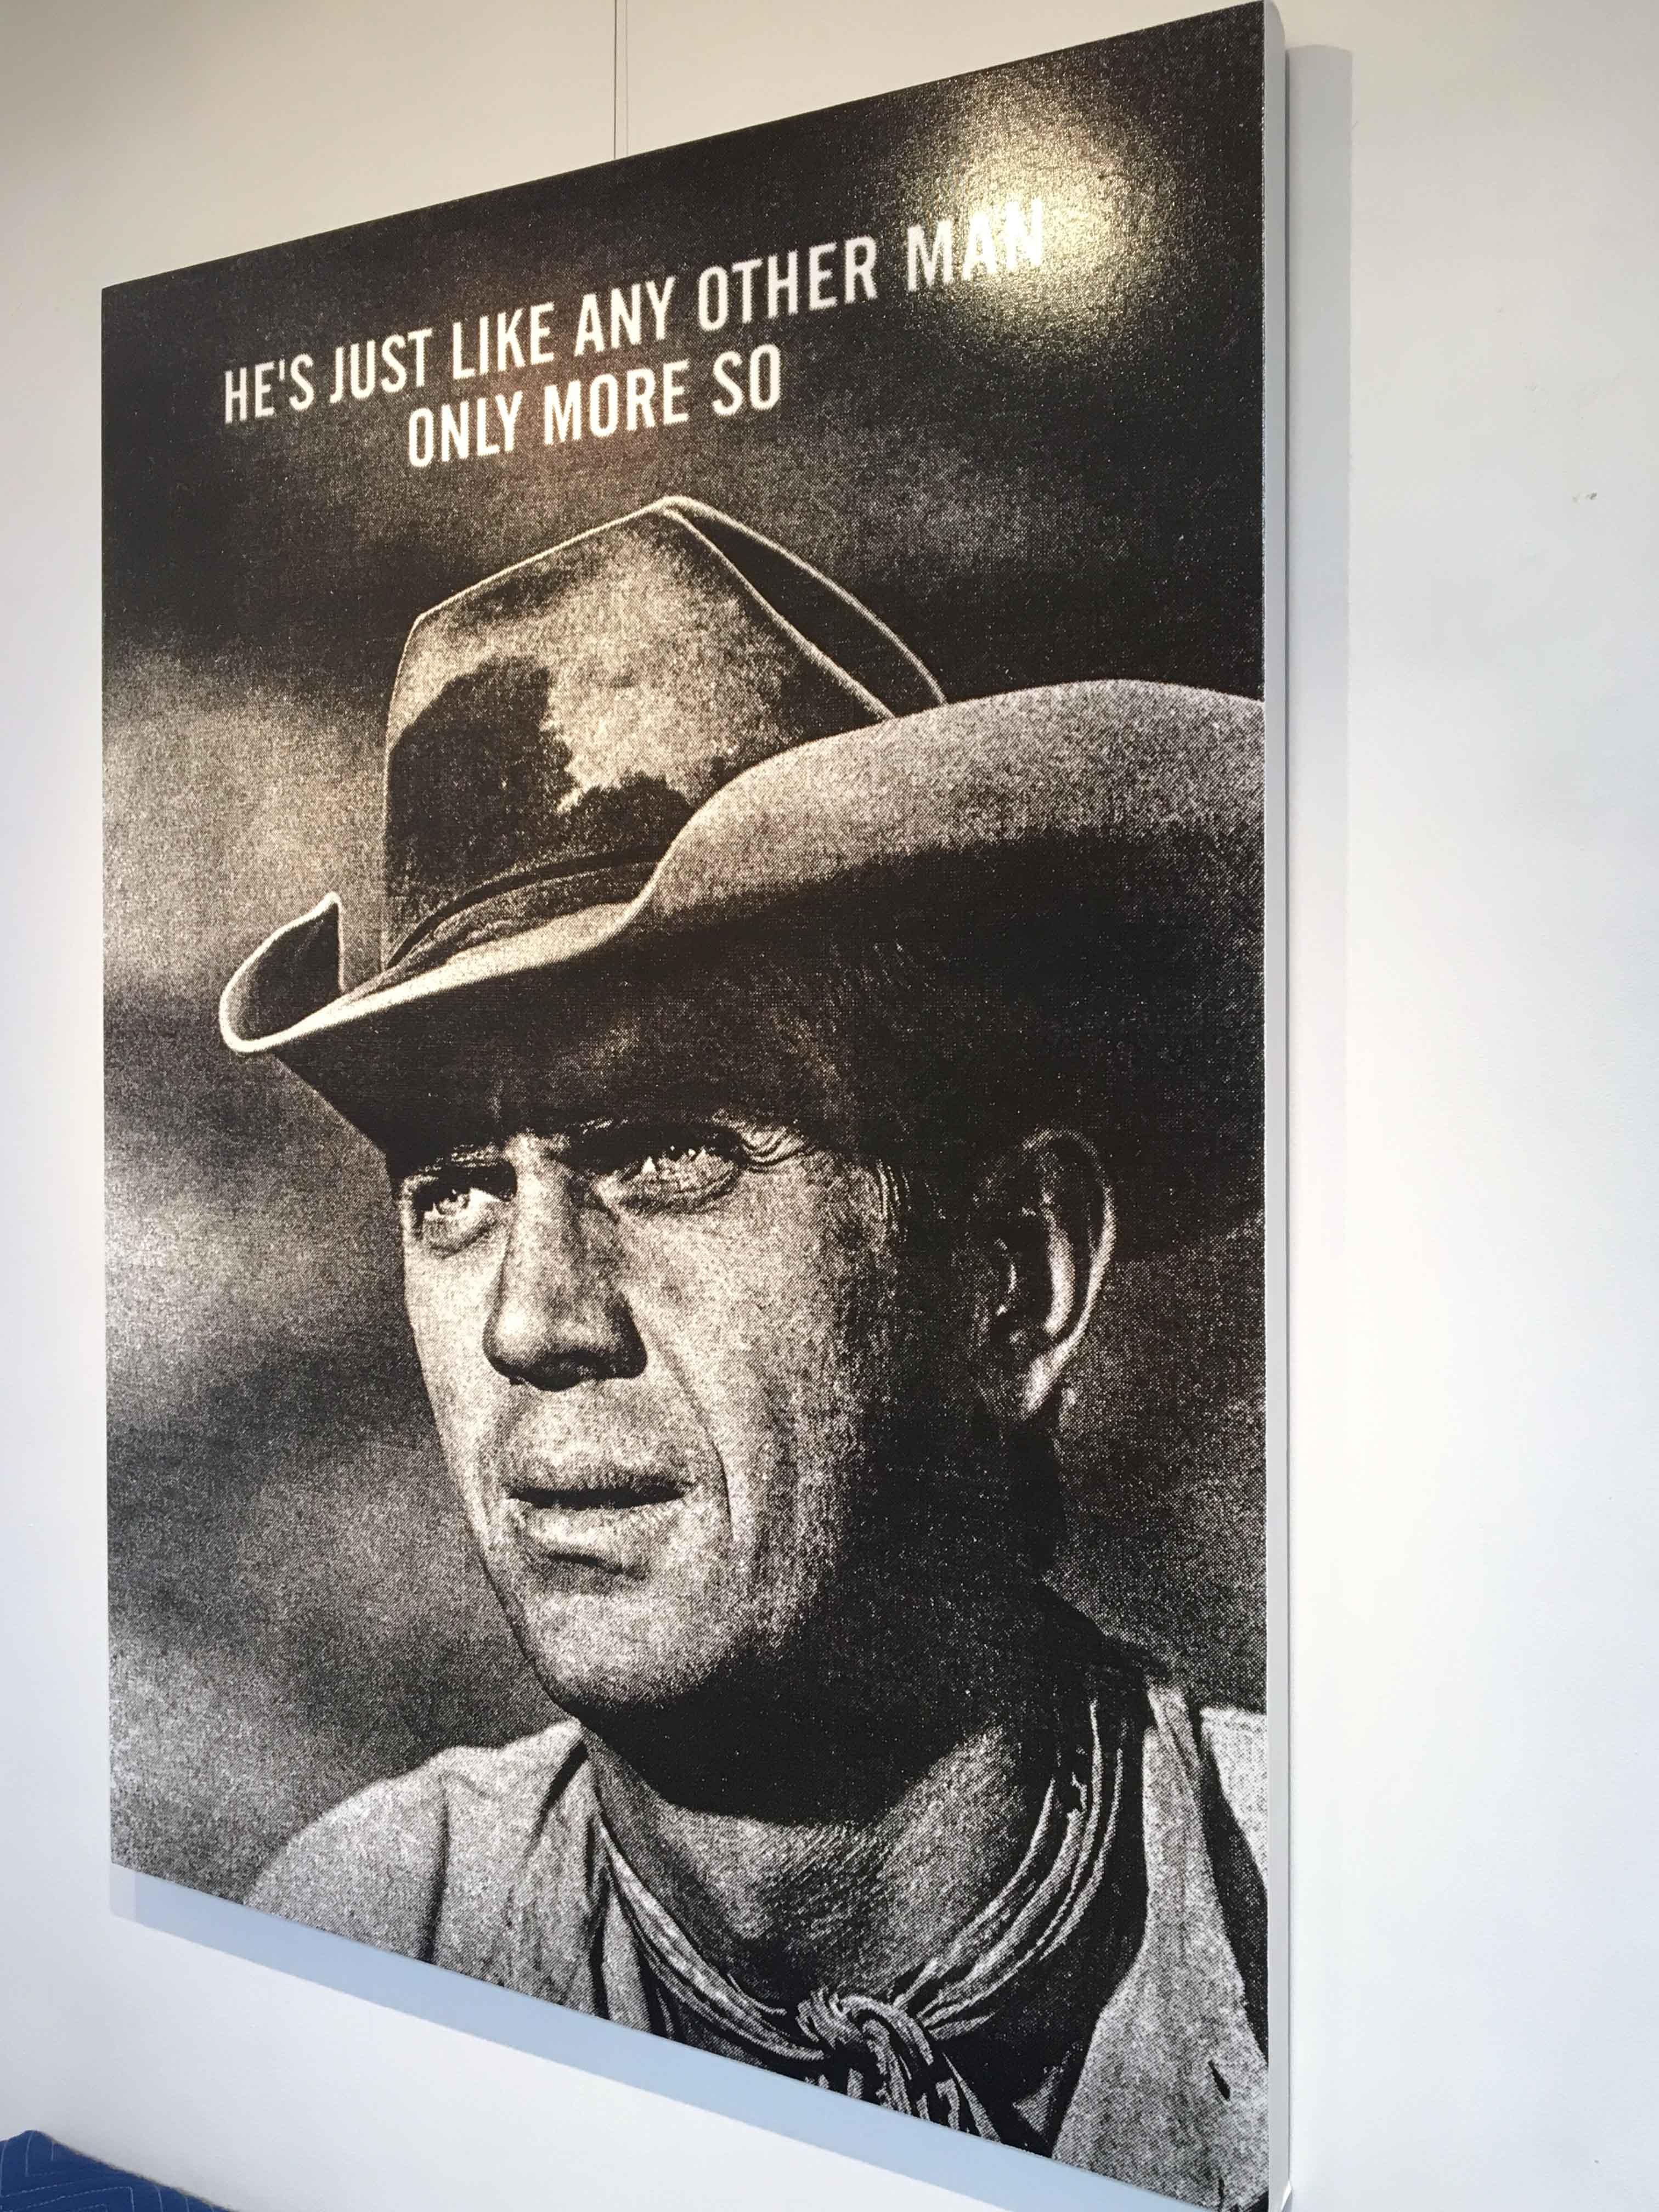 Only More So - Cowboy, Text, Black and White - Mixed Media Art by Ryan Mulford